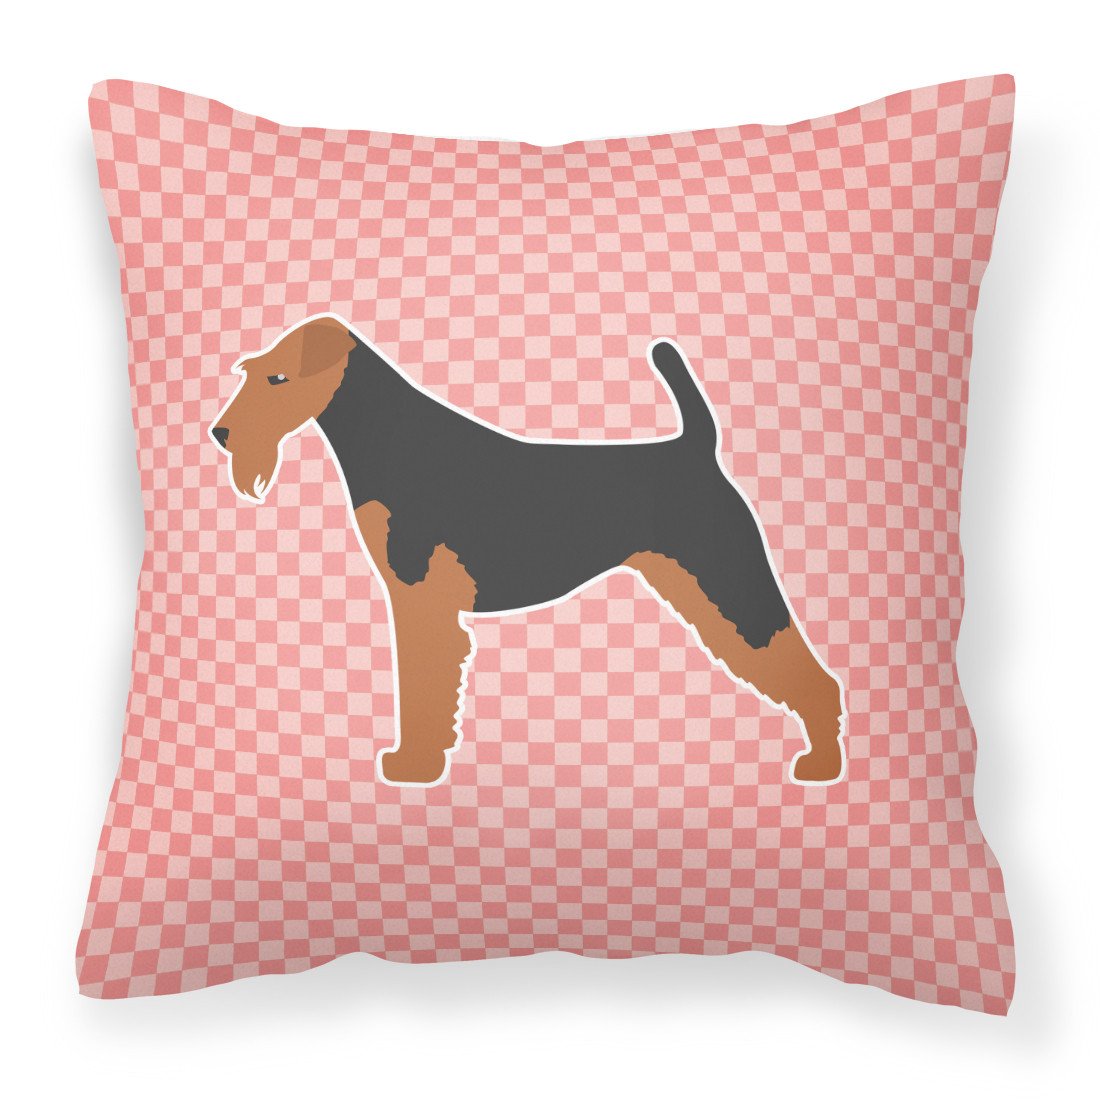 Airedale Terrier Checkerboard Pink Fabric Decorative Pillow BB3657PW1818 by Caroline's Treasures